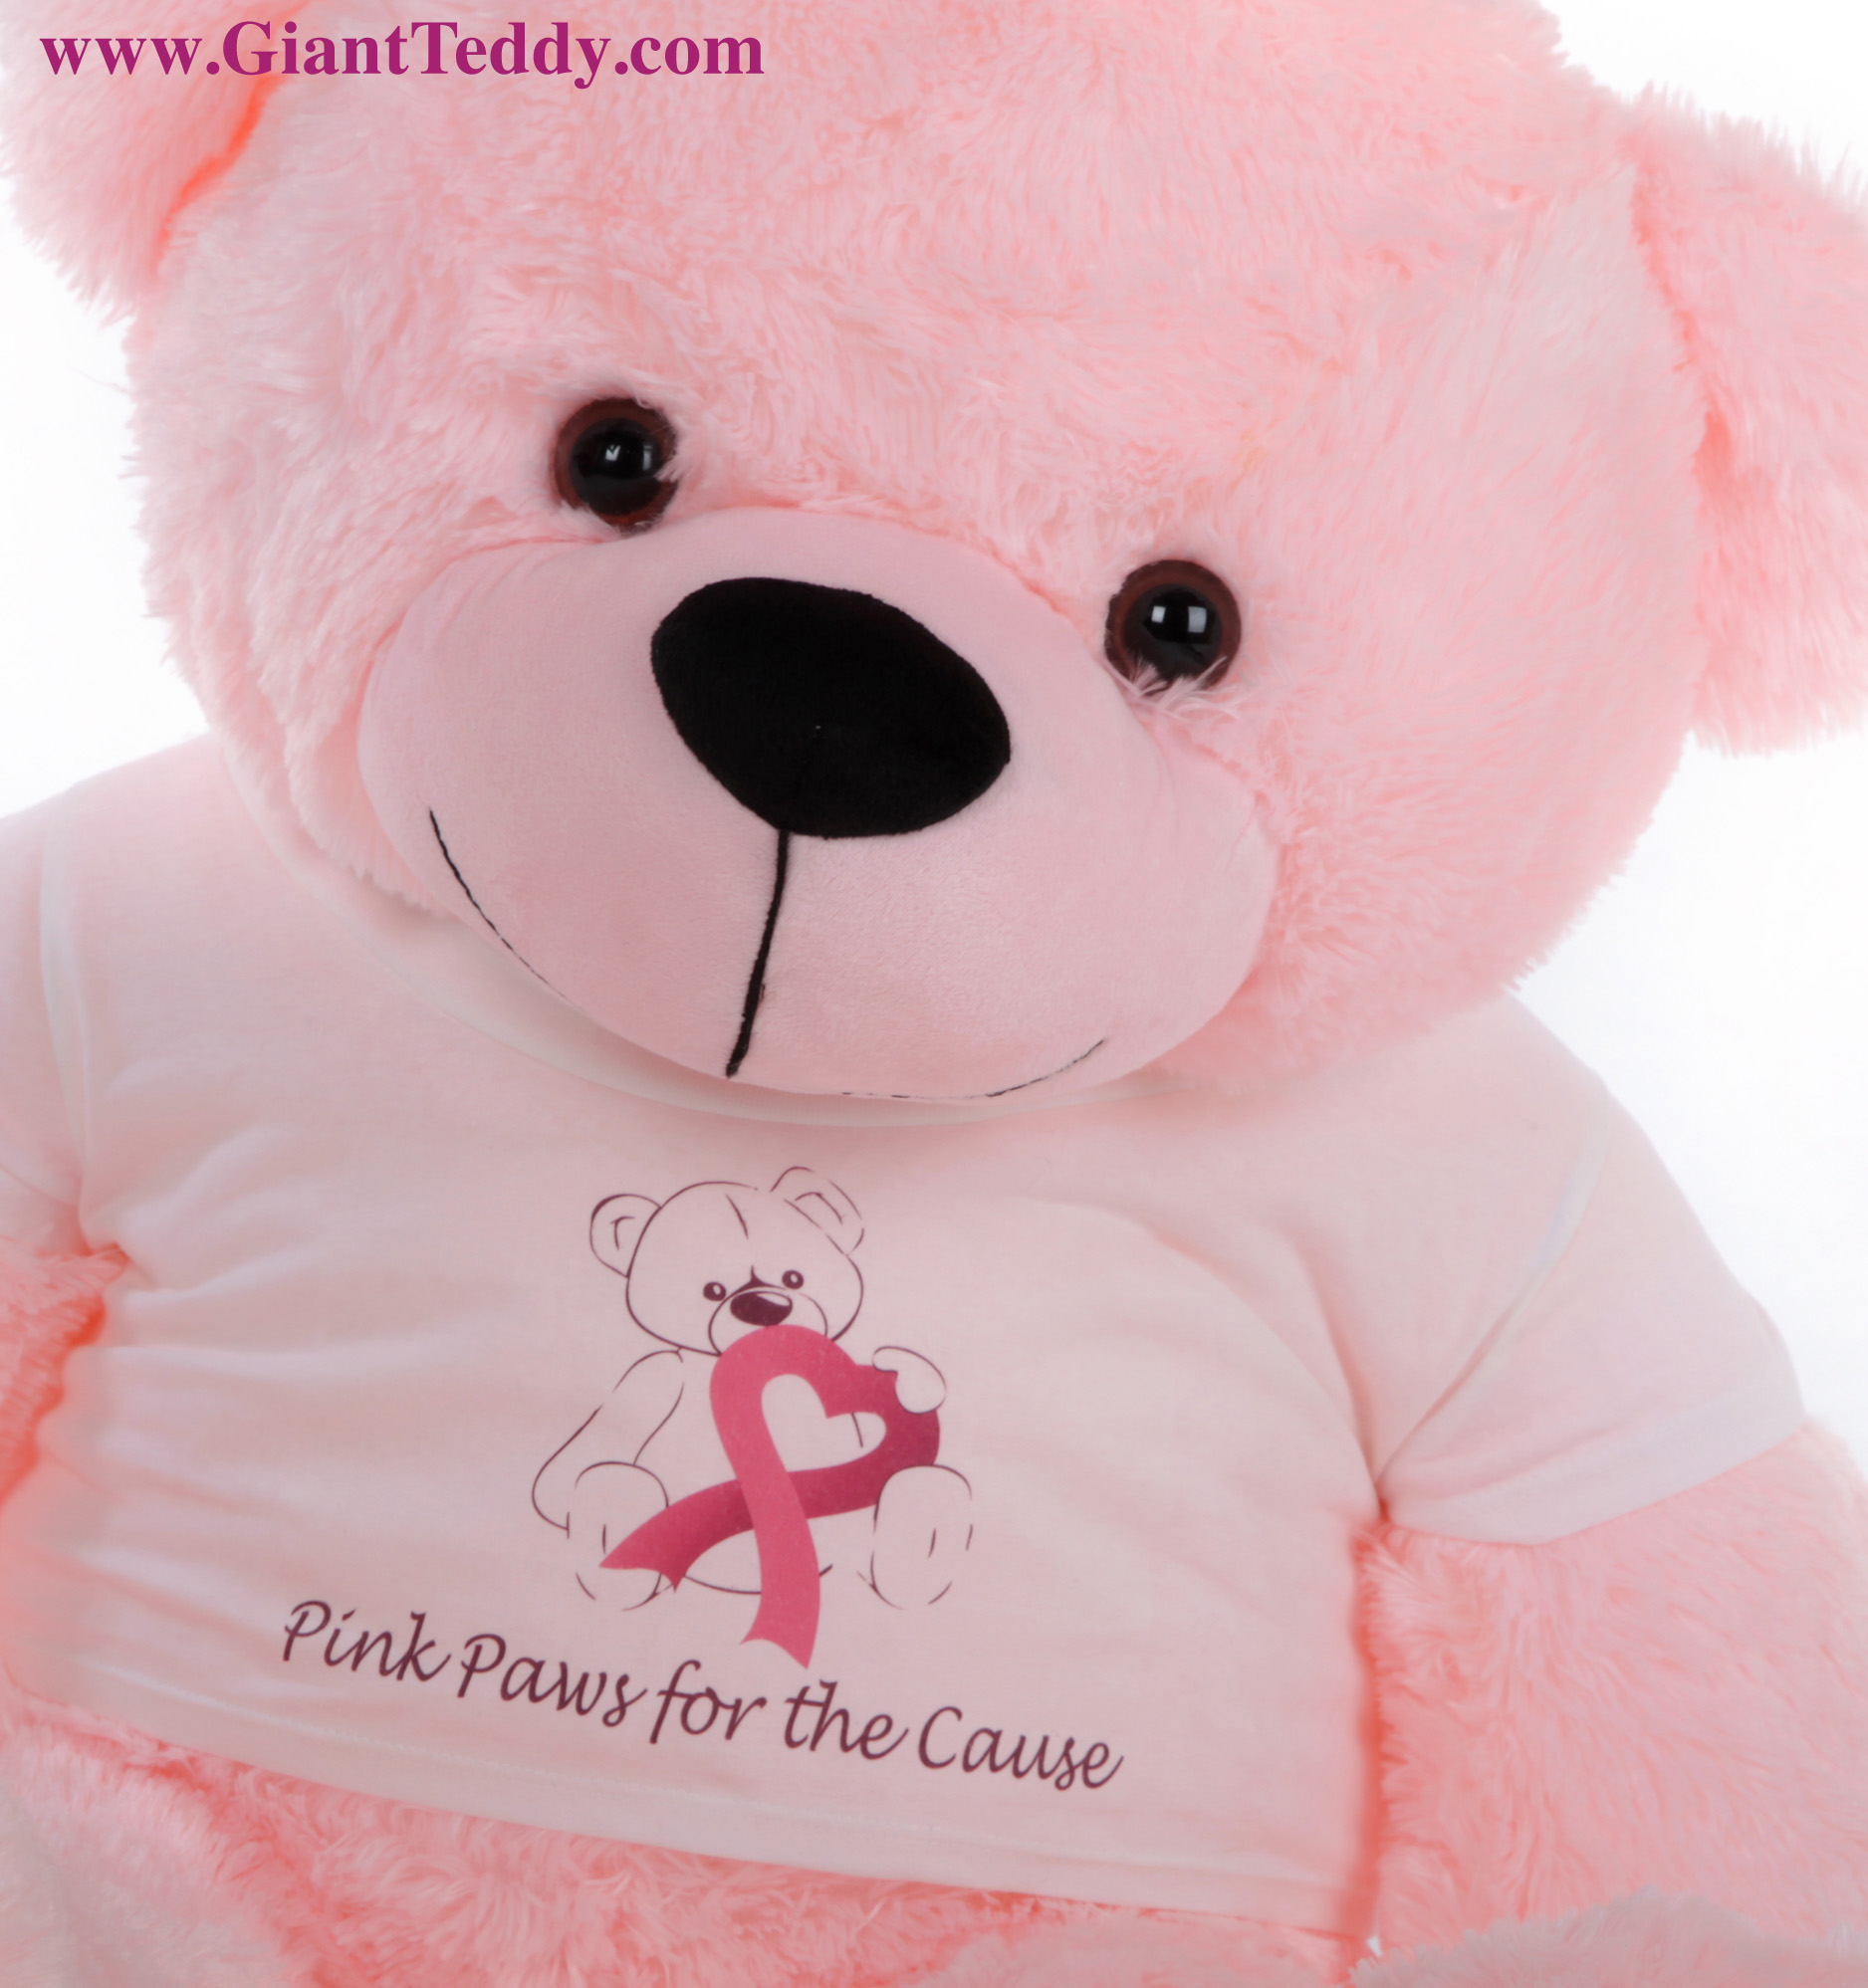 Giant Teddy Bear Lady Cuddles Pink Paws for the Cause Breast Cancer shirt